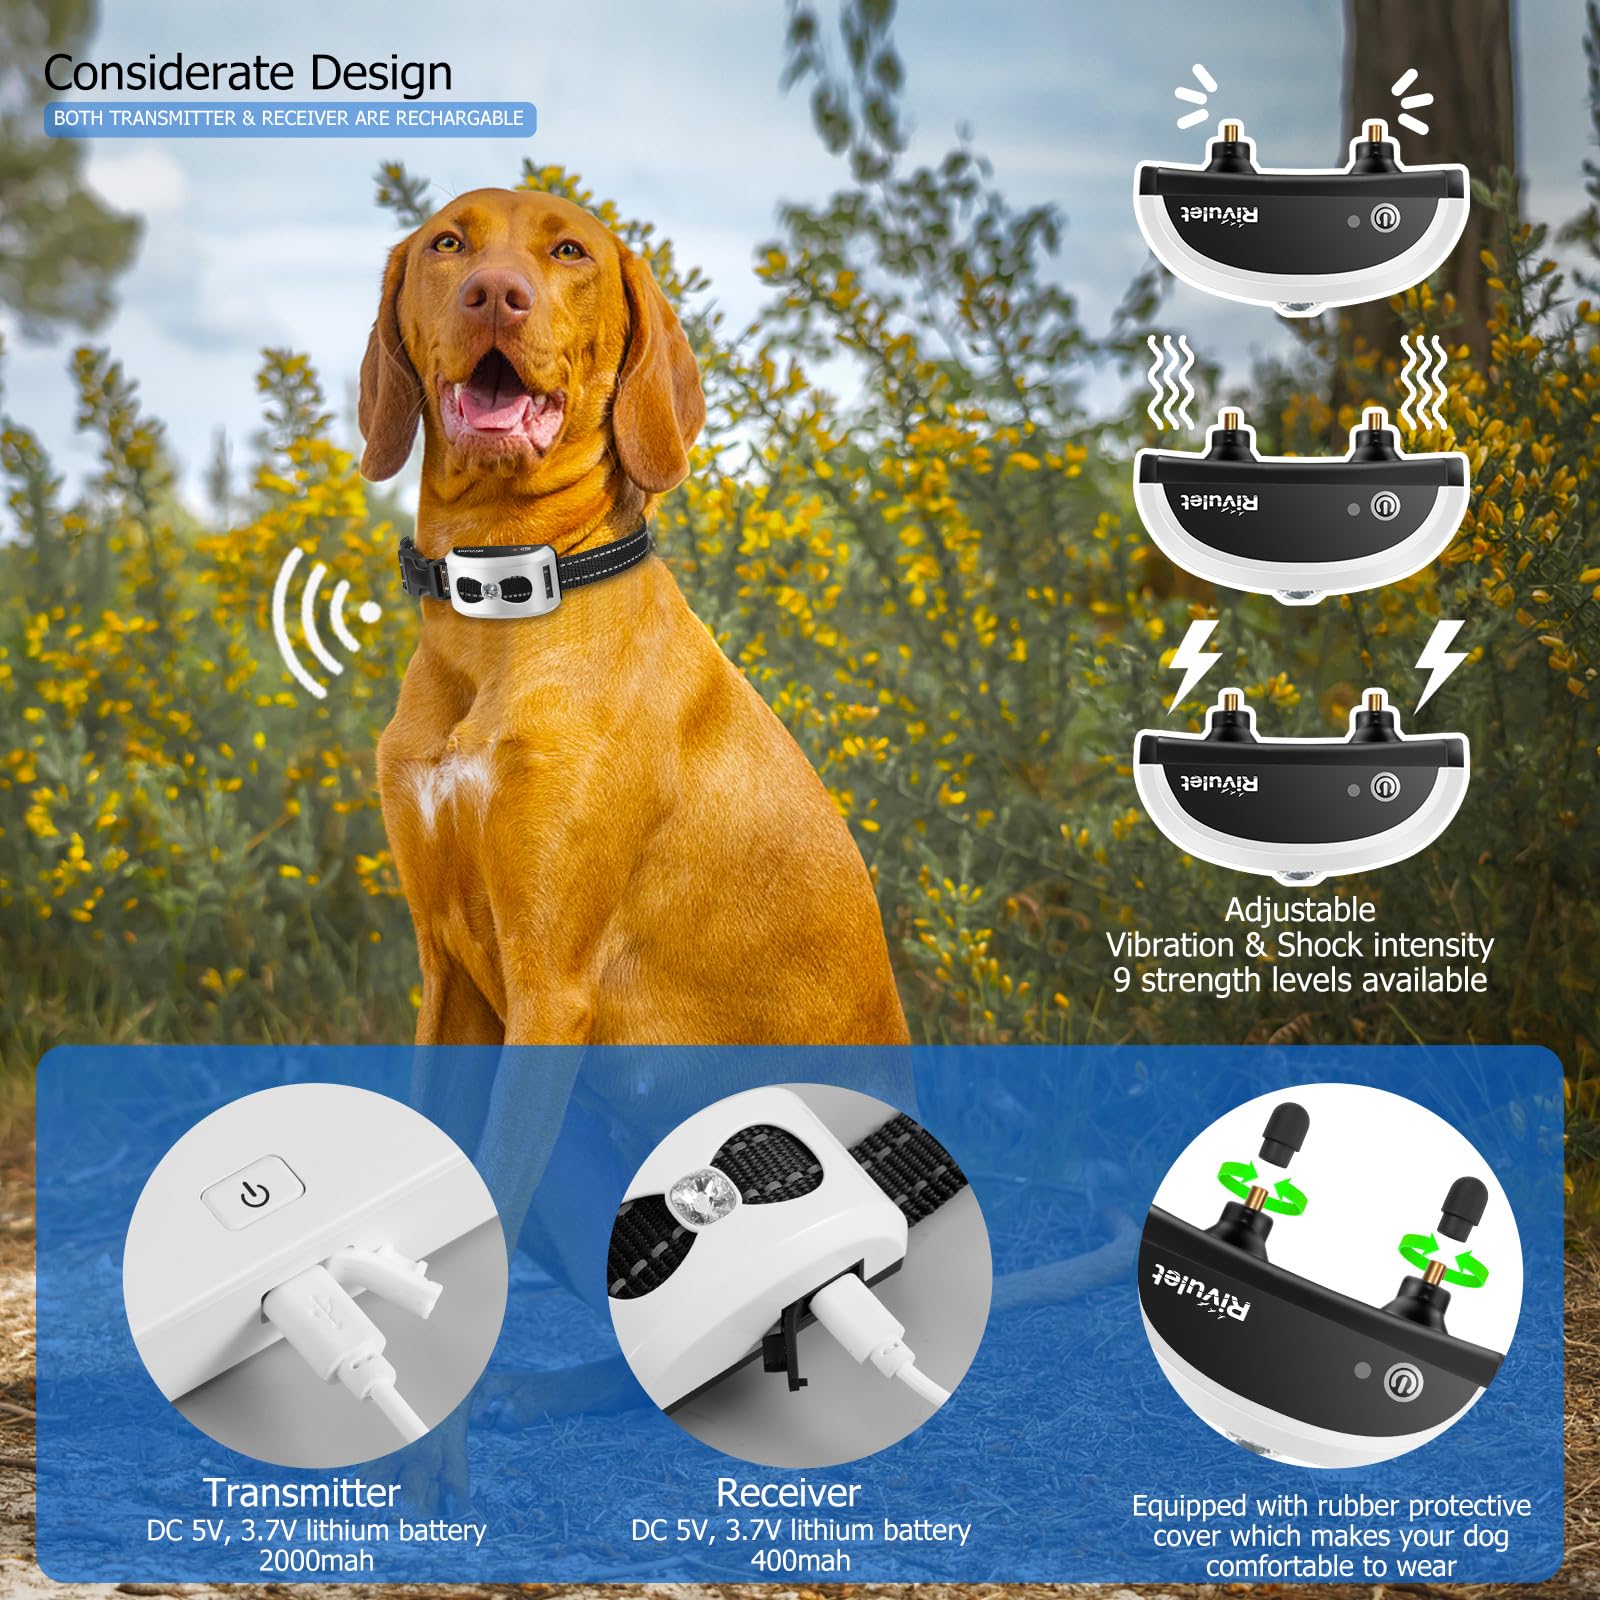 Rivulet Electric Wireless Dog Fence System Electric Dog Fence Training Collar w/Remote 2-in-1, Dog Containment Fence,Adjustable Vibration&Shock Rechargeable Pet Fence for Small Medium Large Dogs